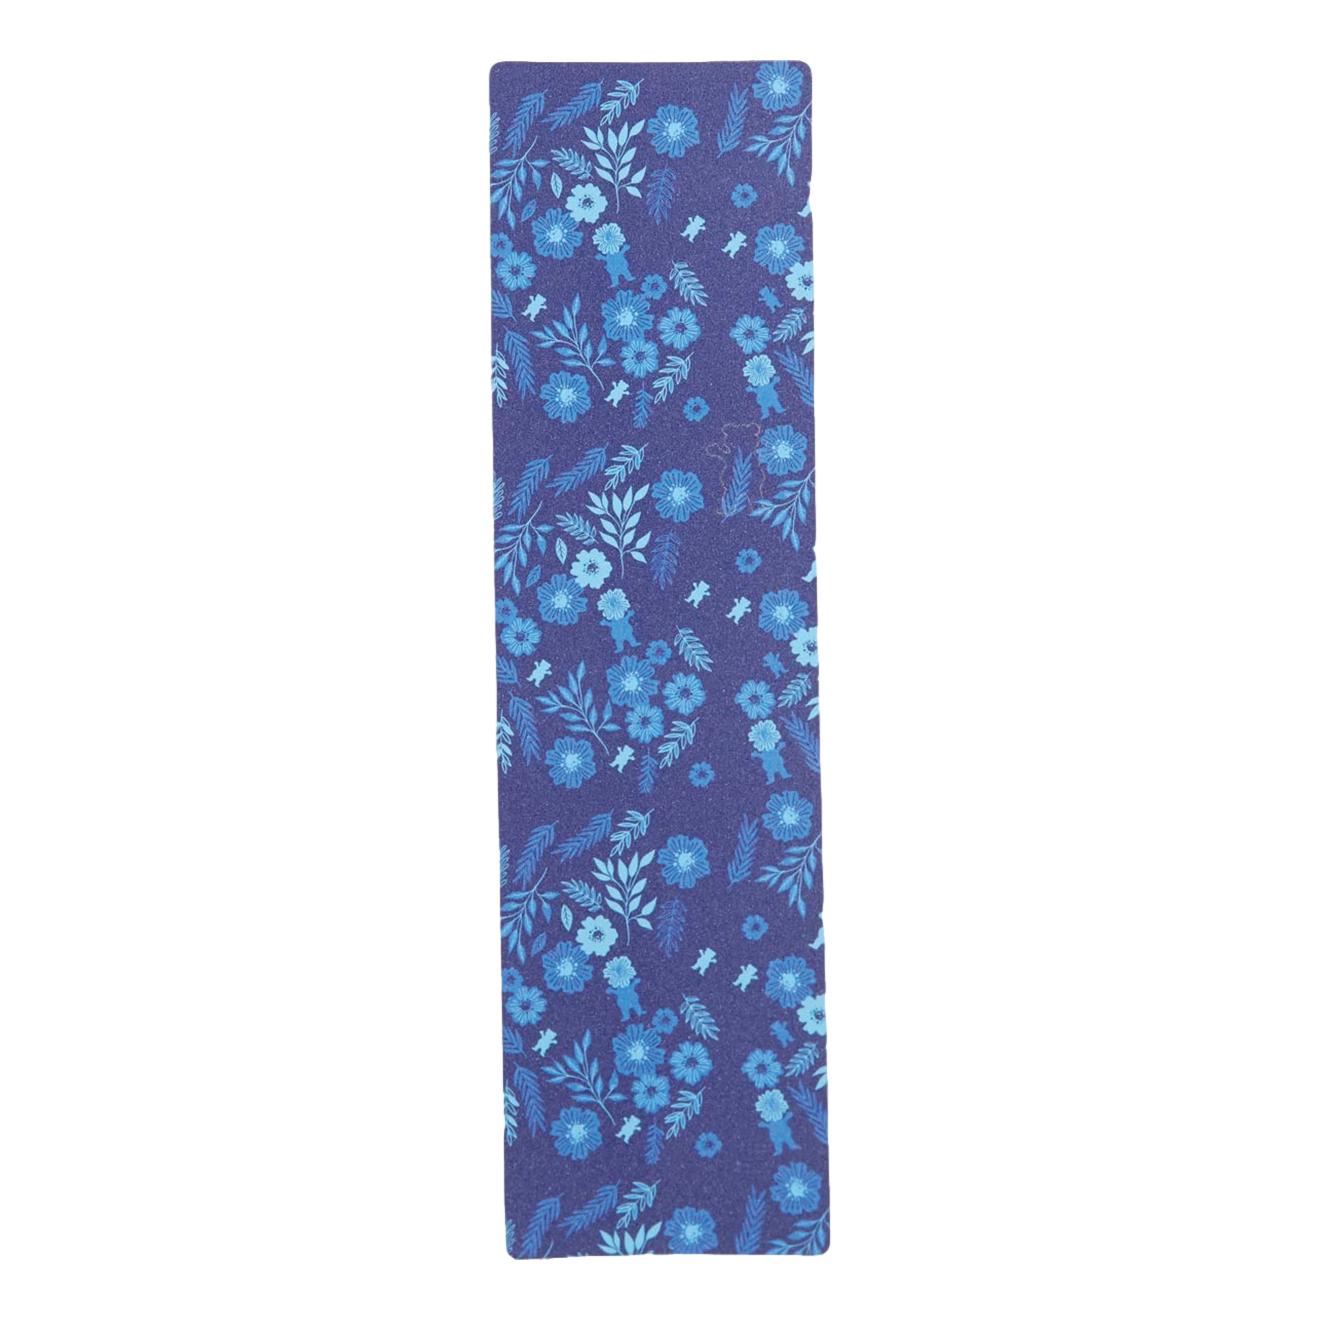 Grizzly Smell The Flowers Navy/Blue - Venue Skateboards